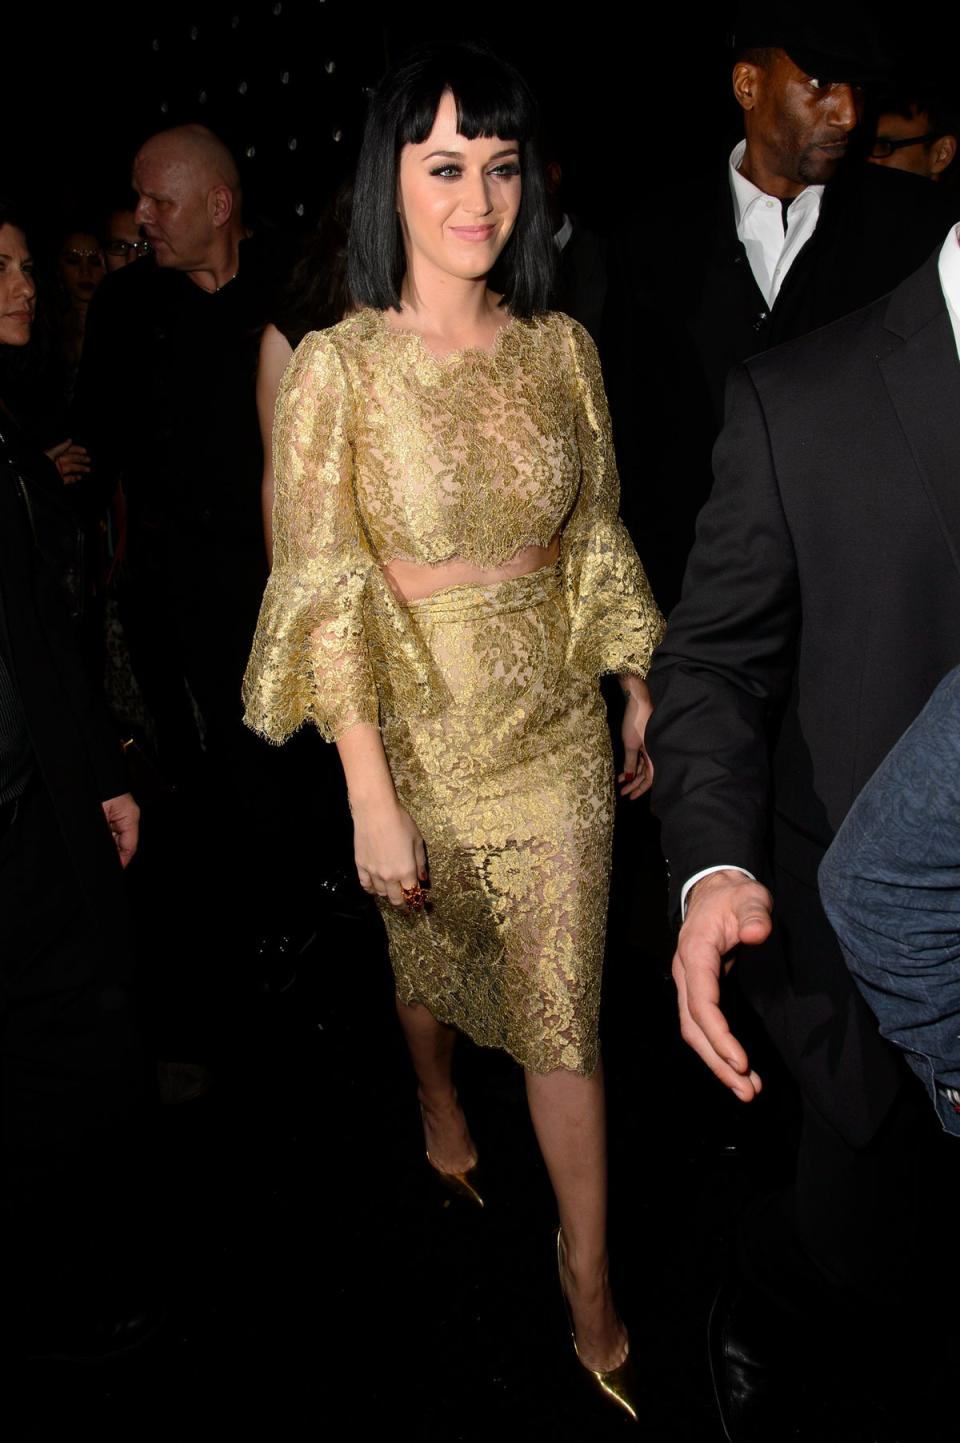 Katy Perry attending the Universal music after-party for The BRIT Awards 2014 at Soho House (Getty Images)